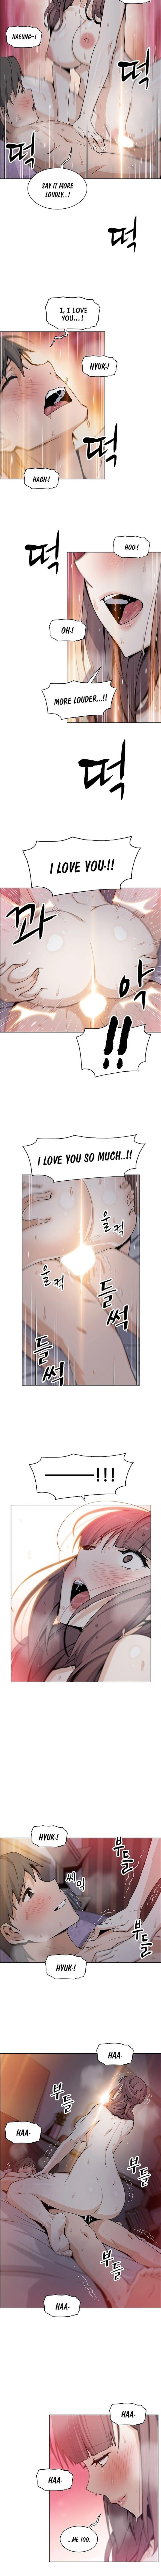 Housekeeper [Neck Pillow, Paper] Ch.49/49 [English] [Manhwa PDF] Completed 311